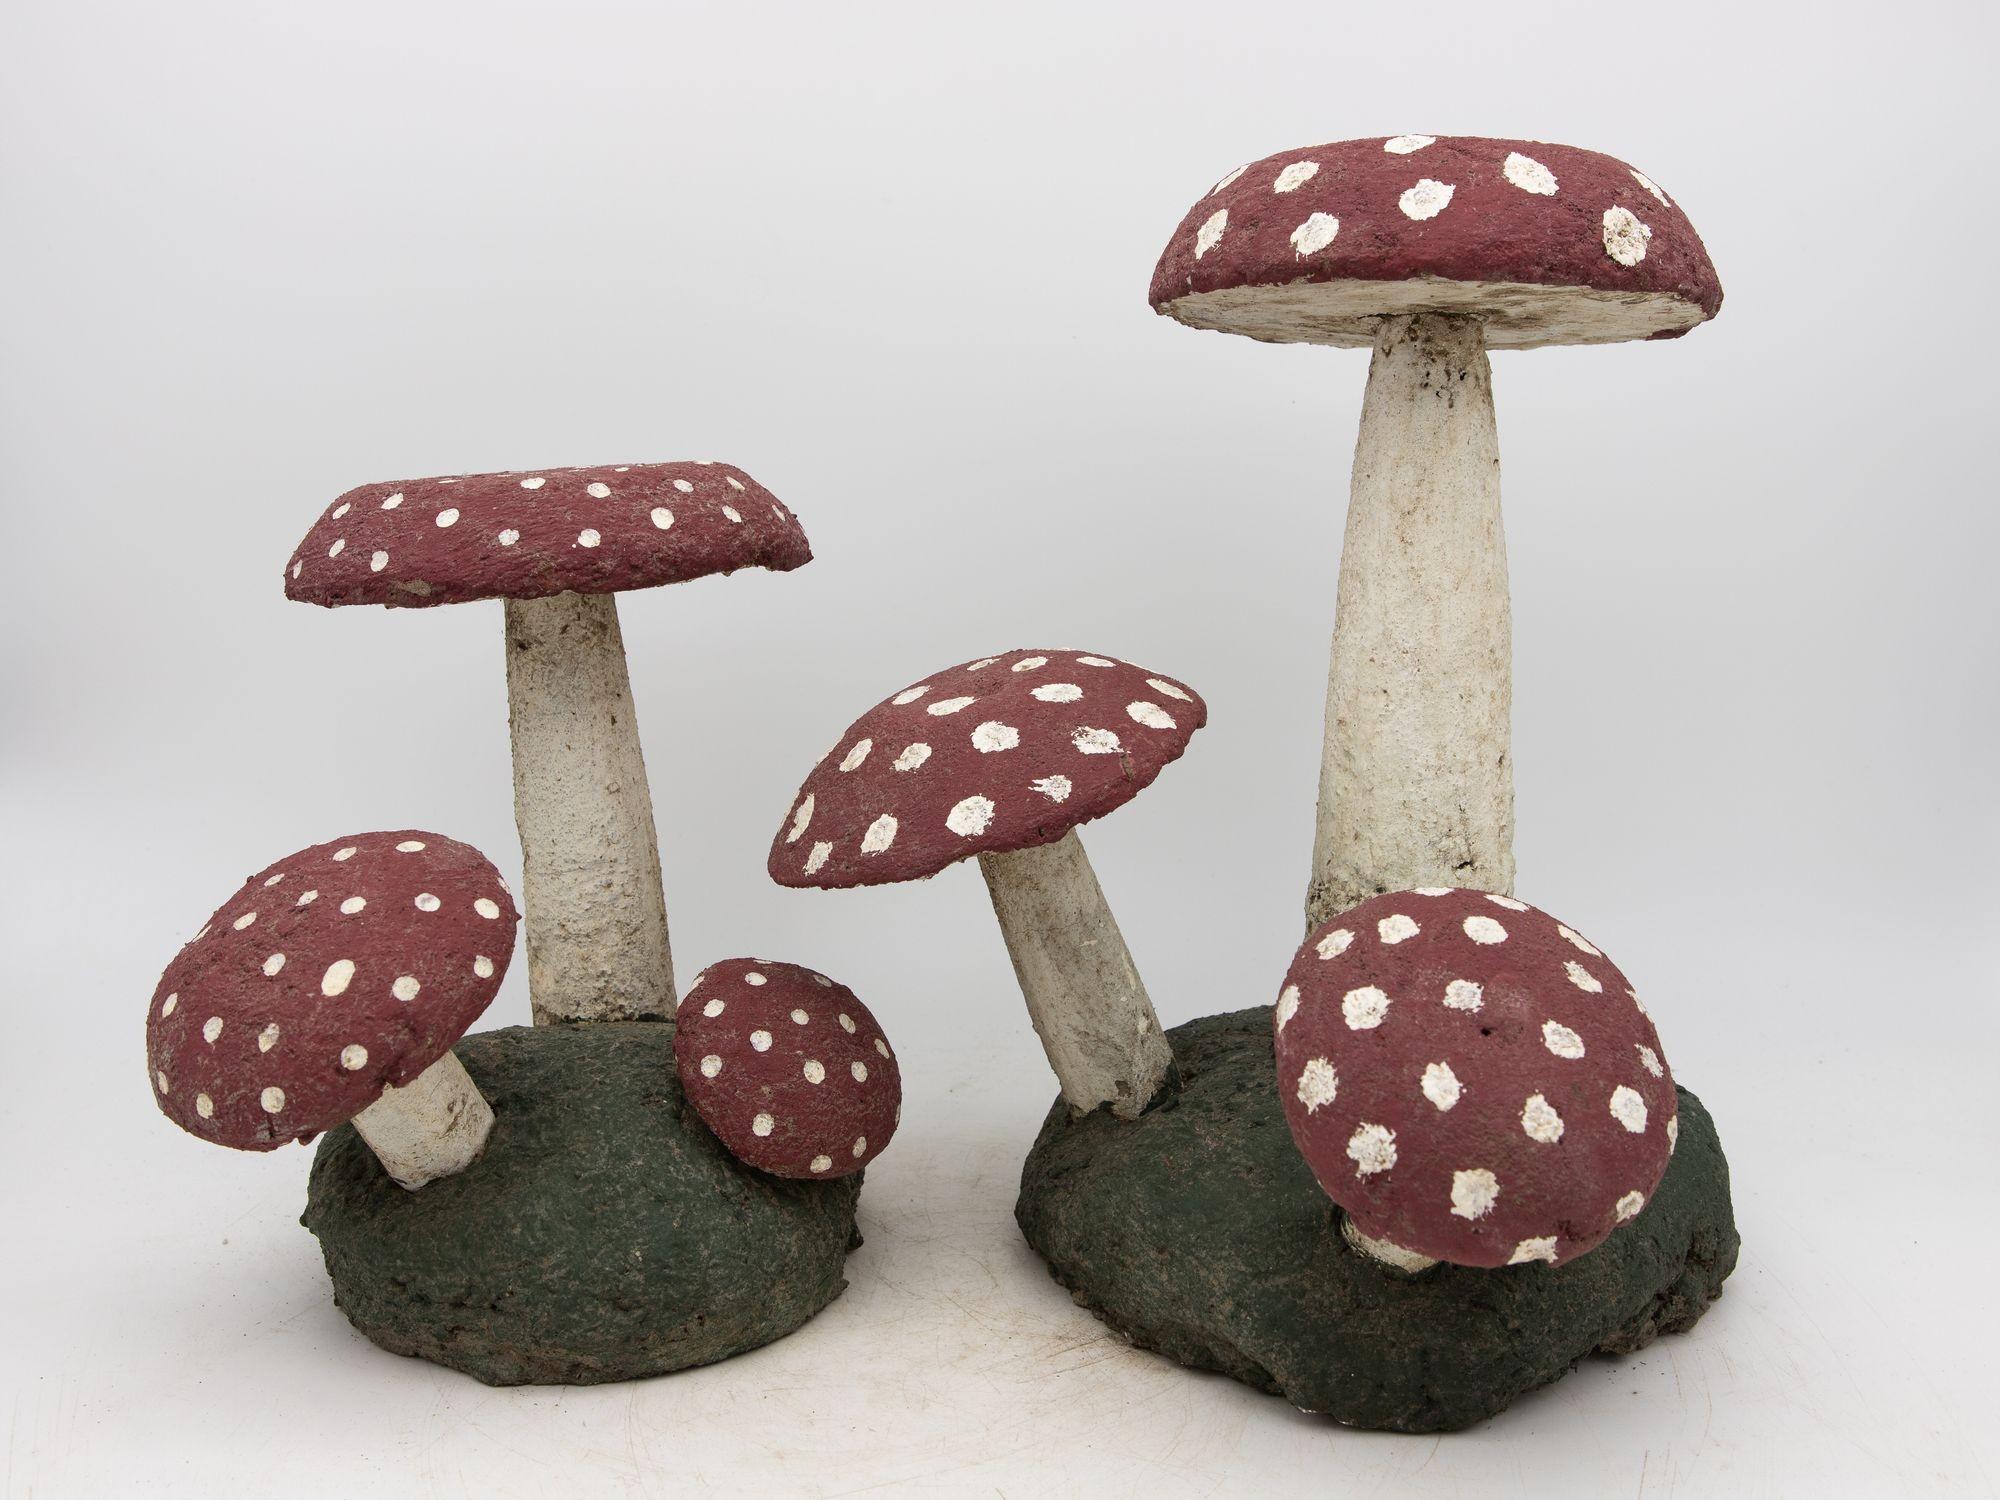 This charming pair of vintage painted stone toadstools hails from mid-20th century Belgium, epitomizing whimsical garden decor. Standing tall with painted red caps adorned with white spots, they exude a playful, fairytale-like allure. Crafted from